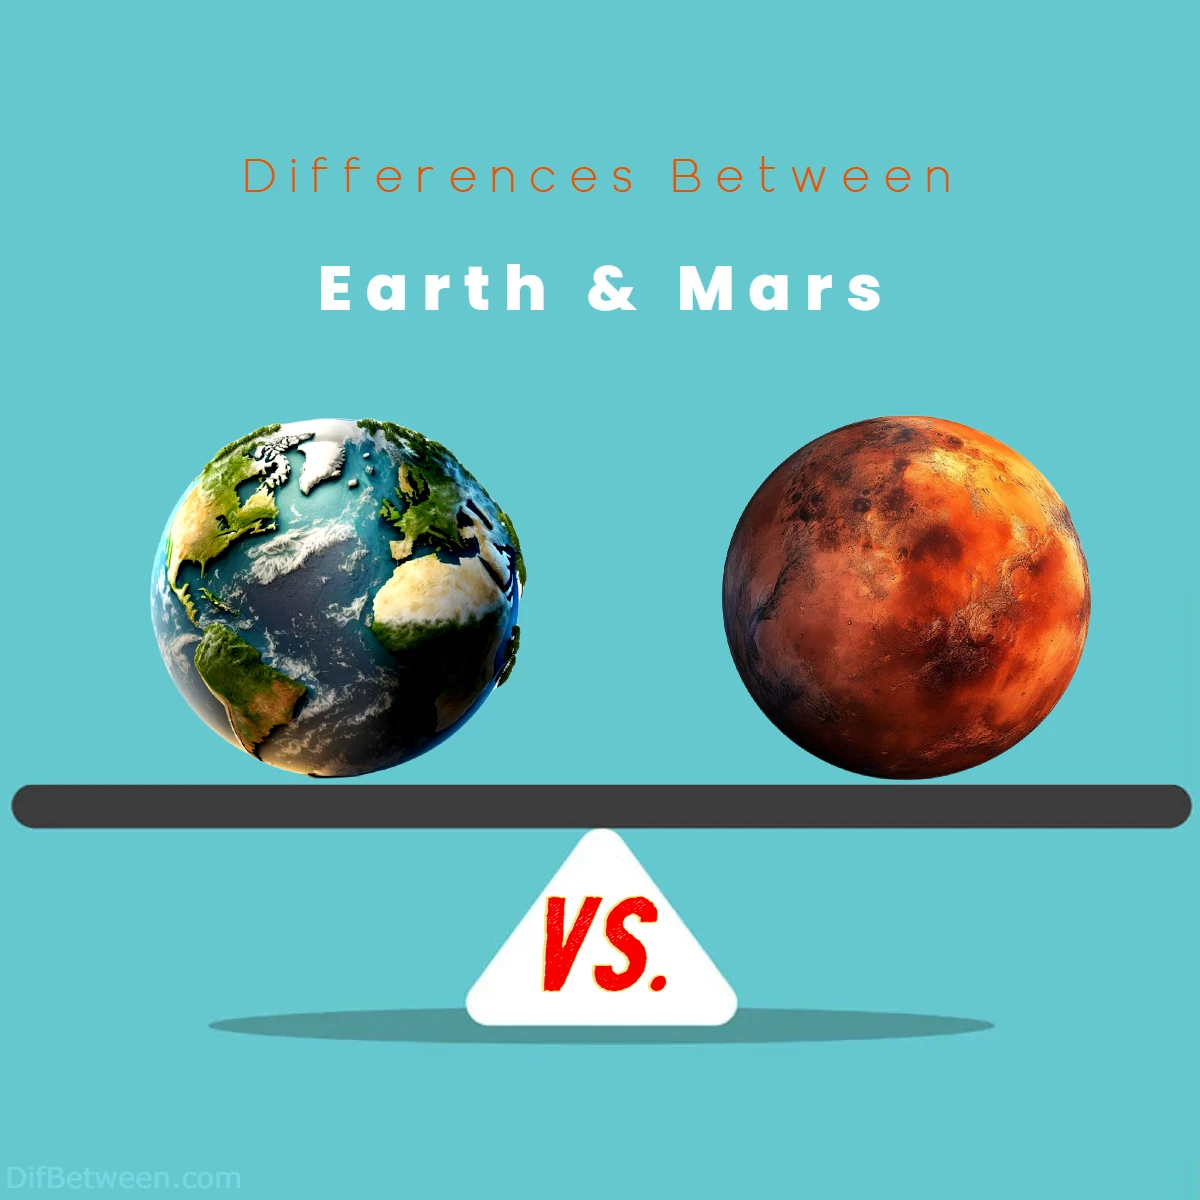 Differences Between Earth vs Mars